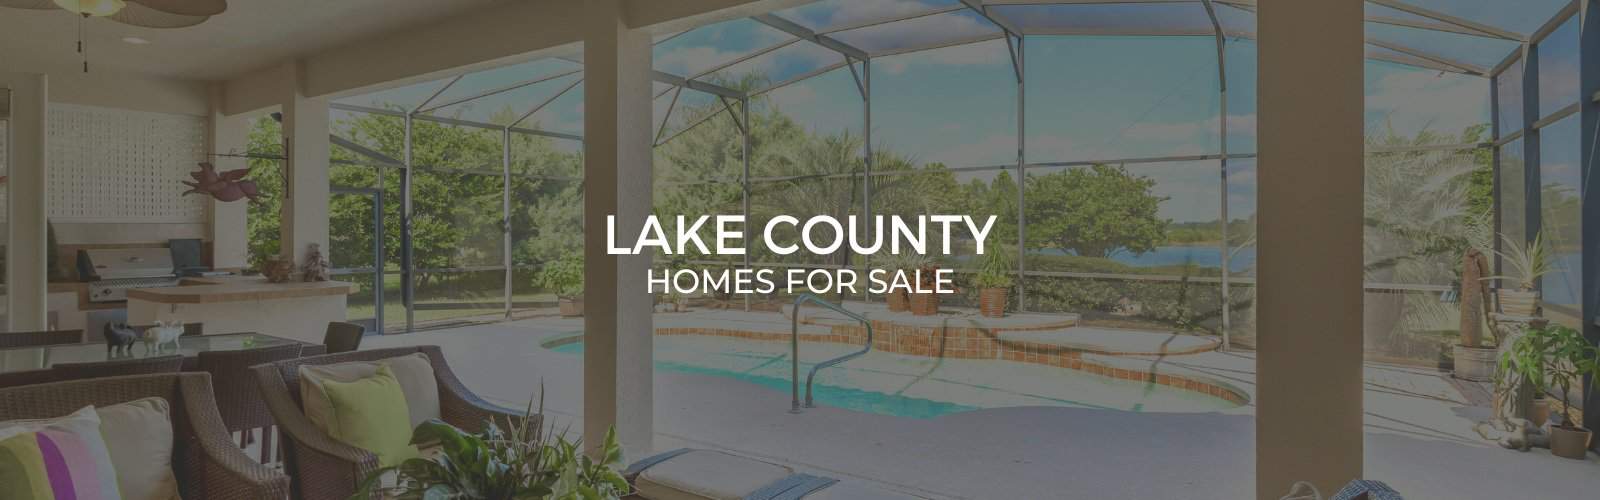 Lake County Homes for Sale